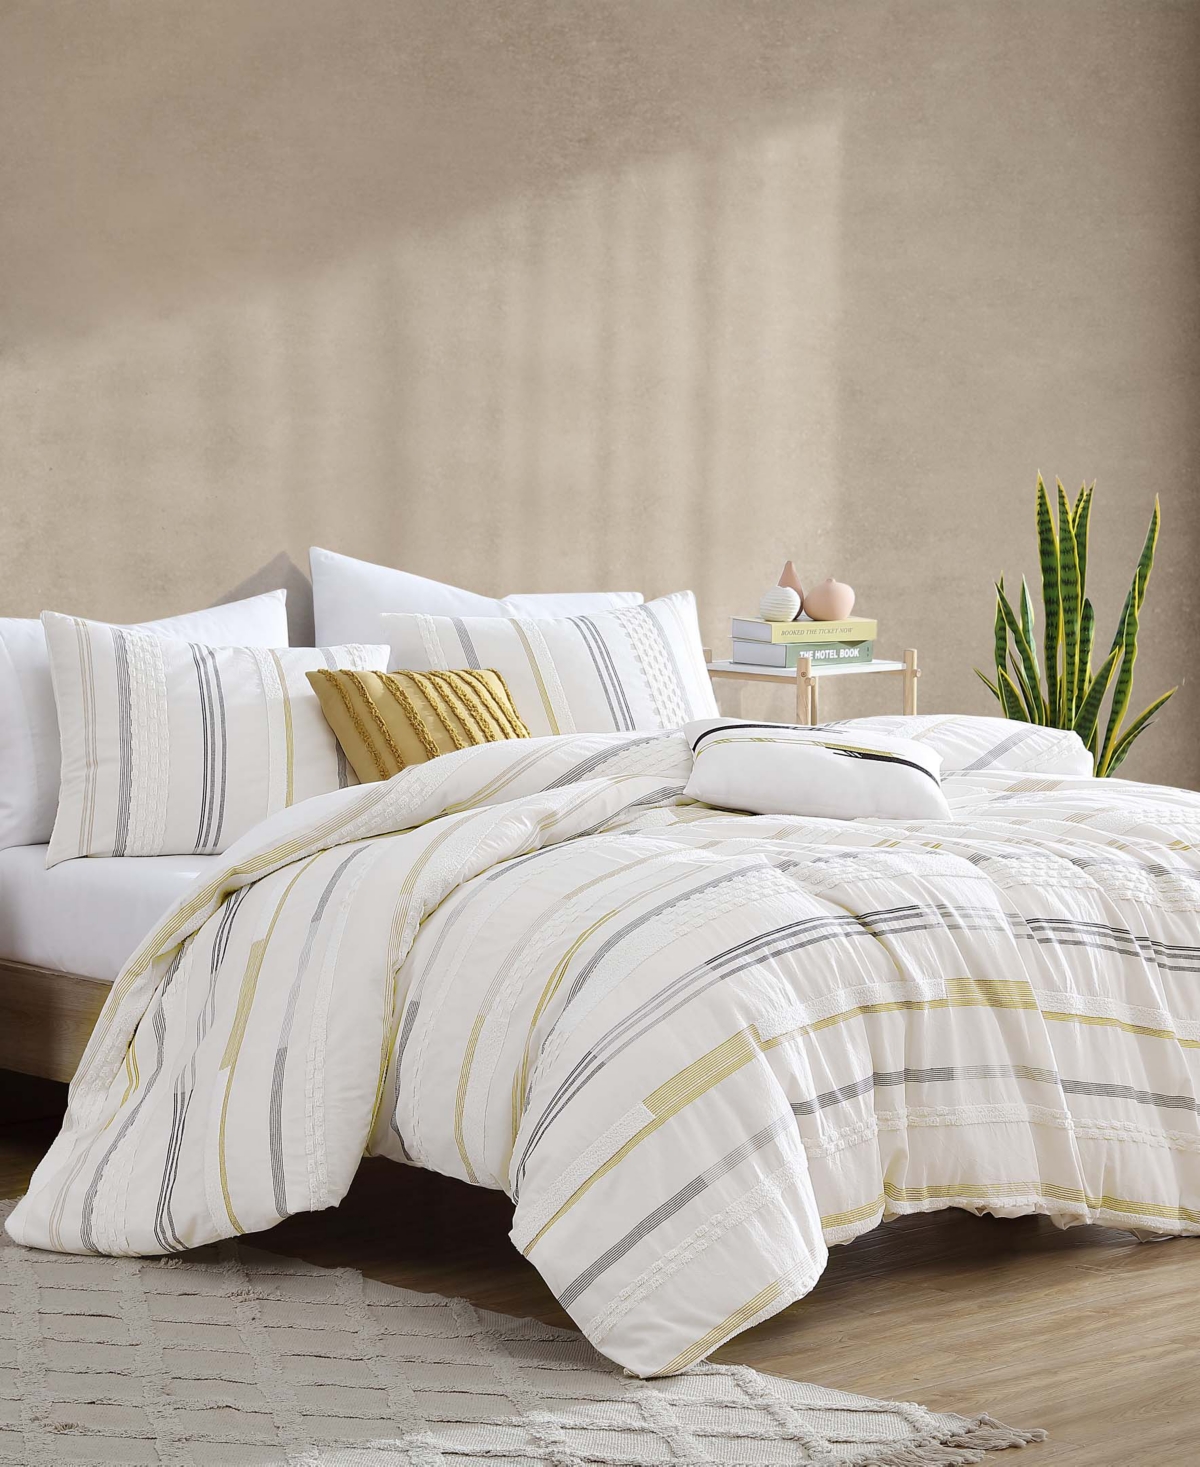 Riverbrook Home Whitten 6-pc. Comforter With Removable Cover Set, Queen In Ivory,gold,gray